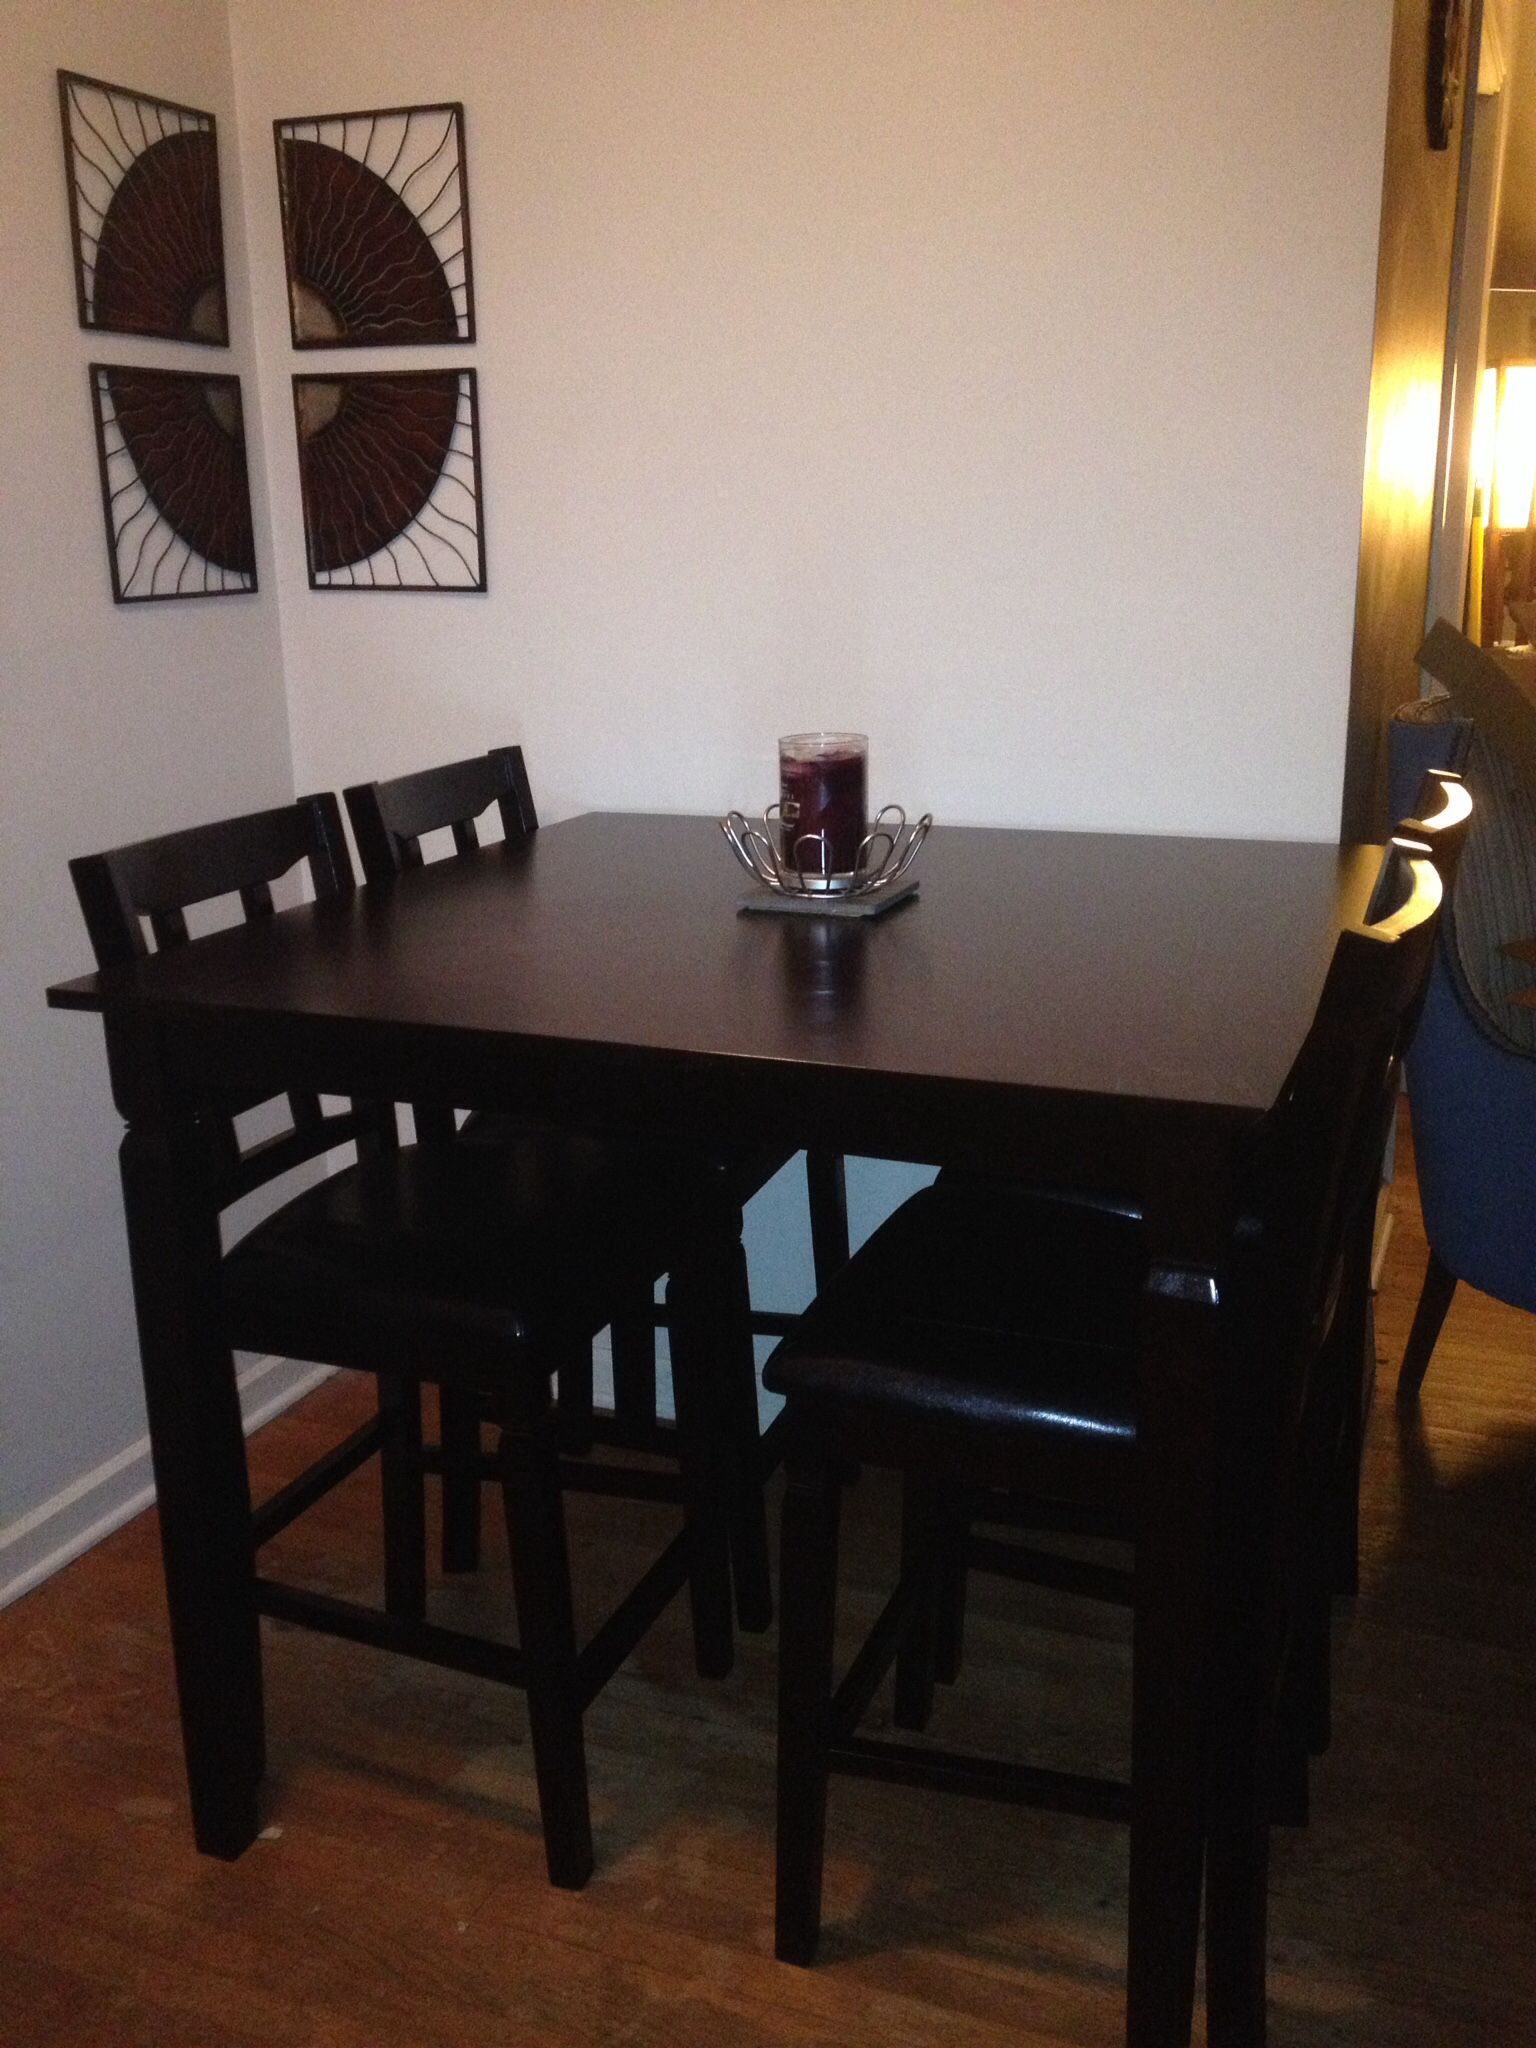 Espresso Pub Table And Chairs From Big Lots Works Great In with proportions 1536 X 2048